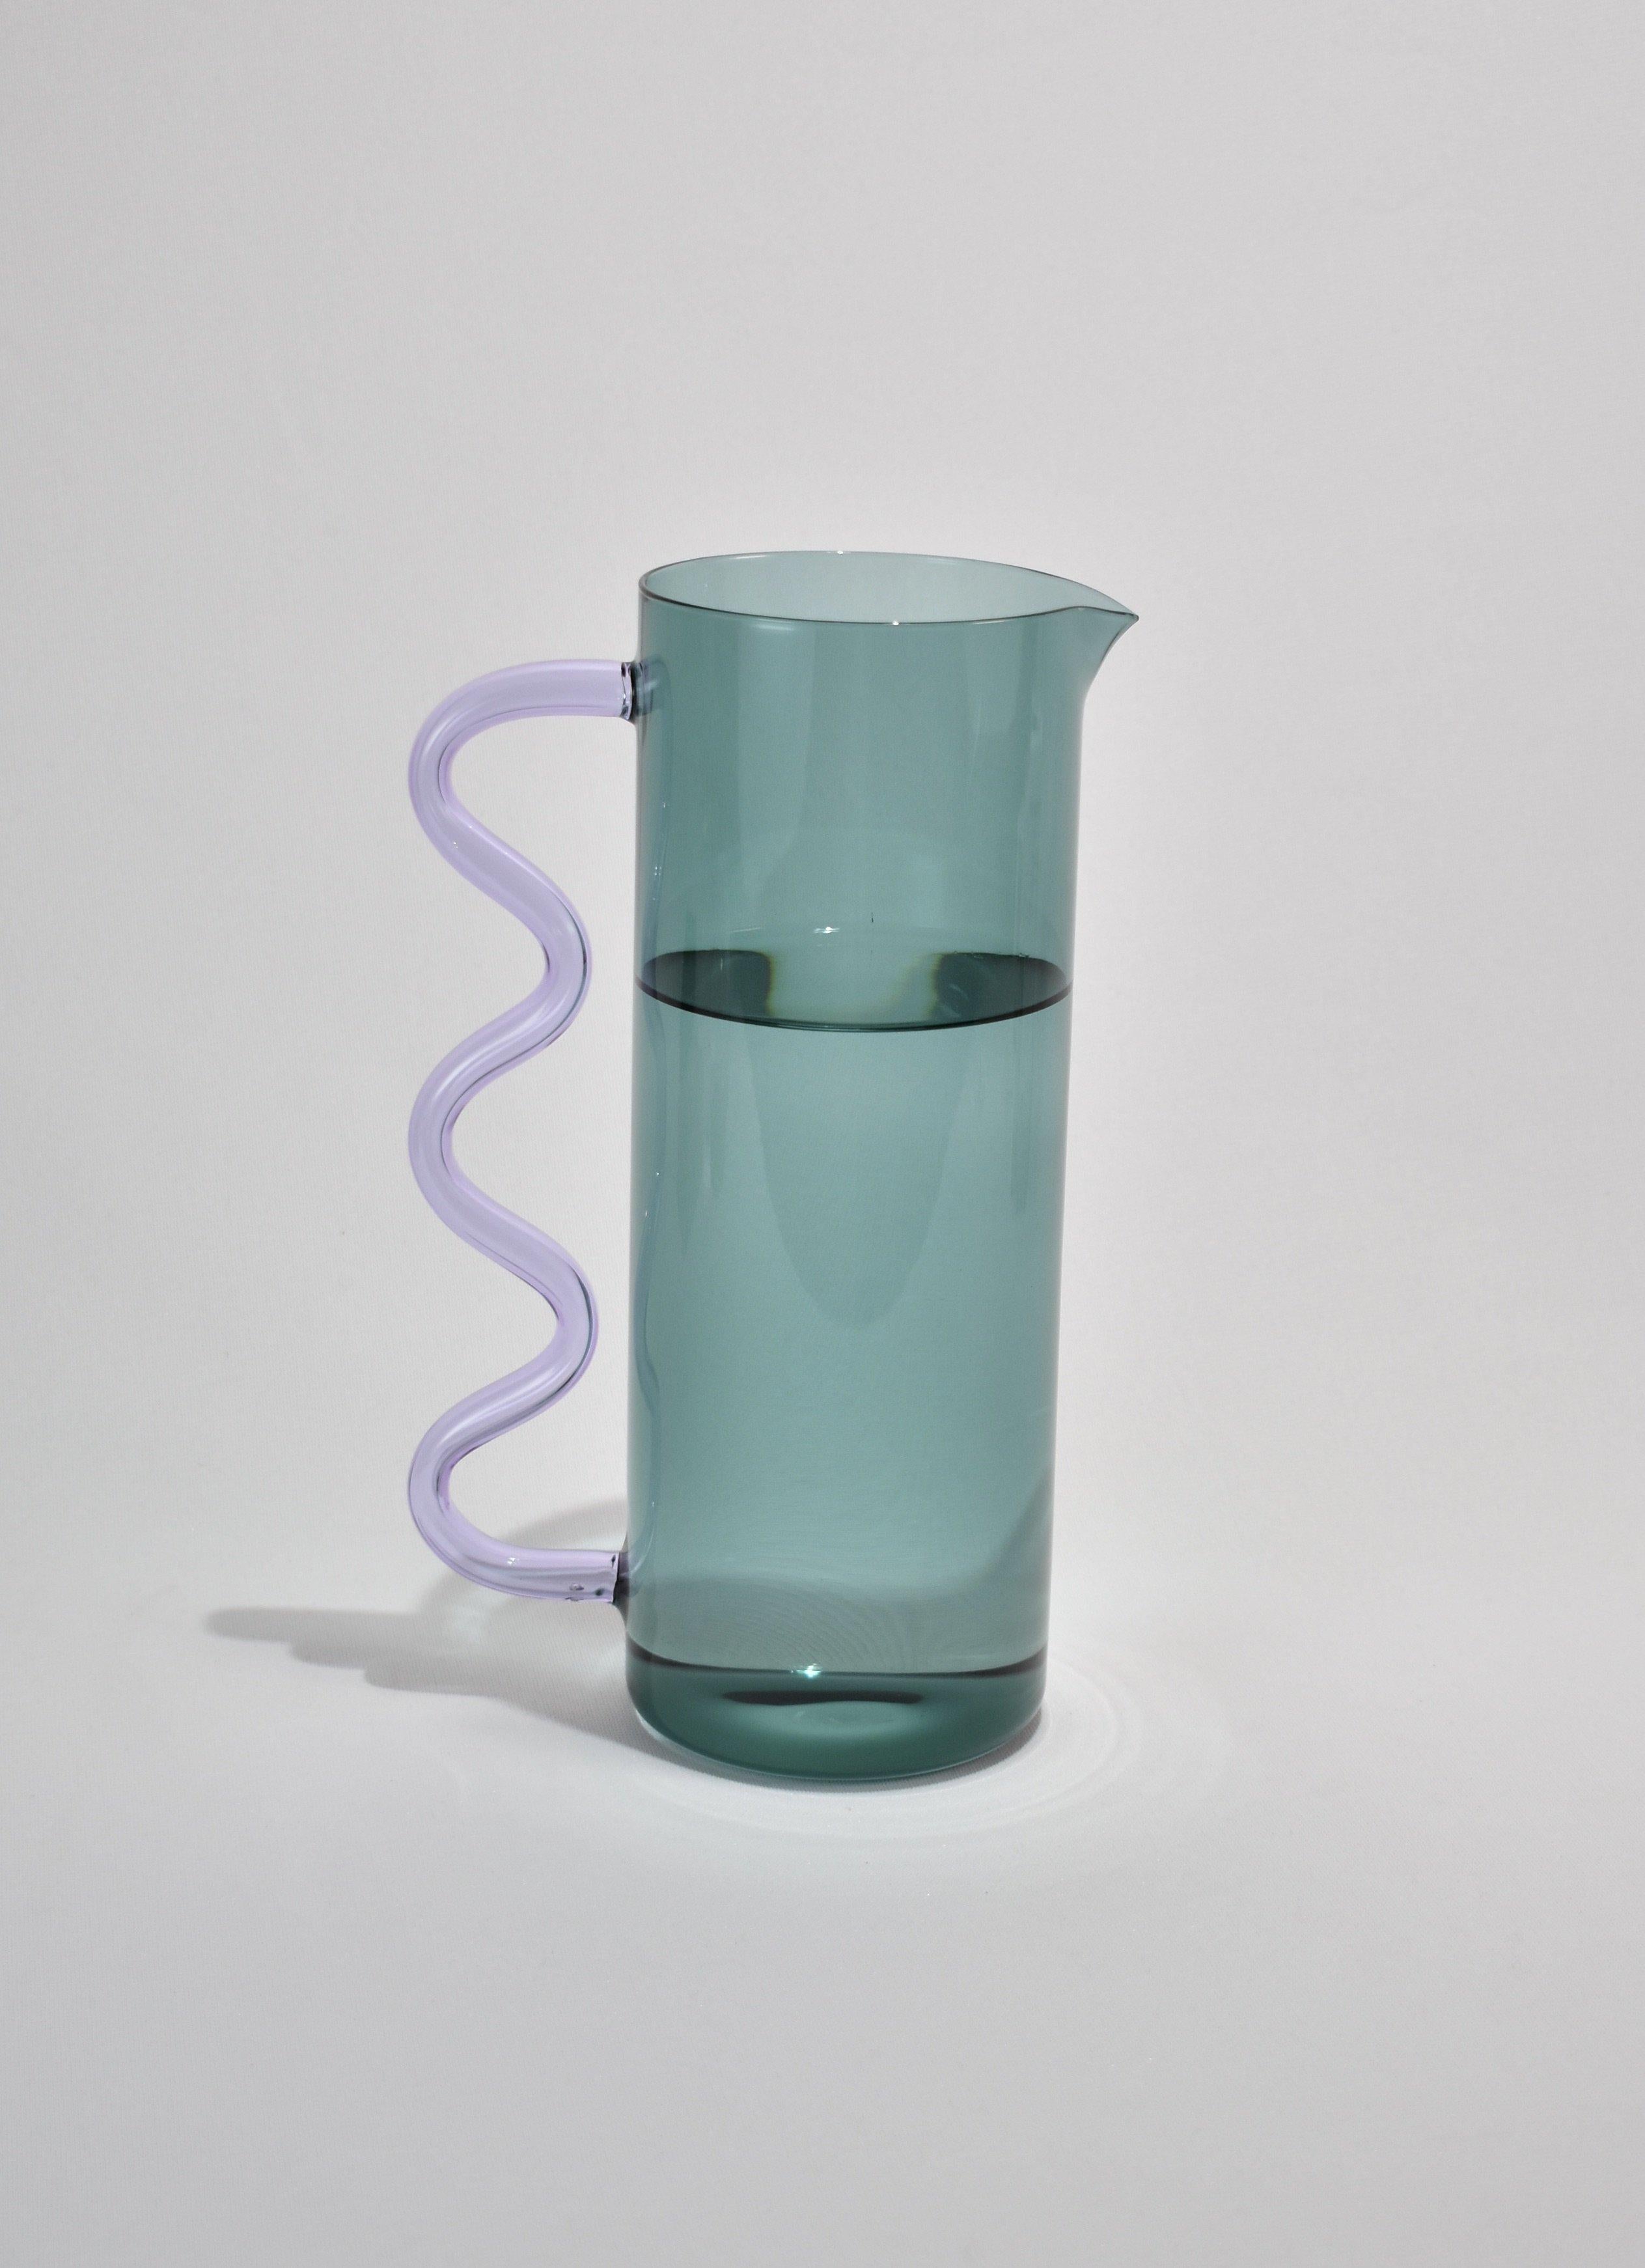 Hand-Crafted Glass Pitcher in Teal with a Lilac Wavy Handle